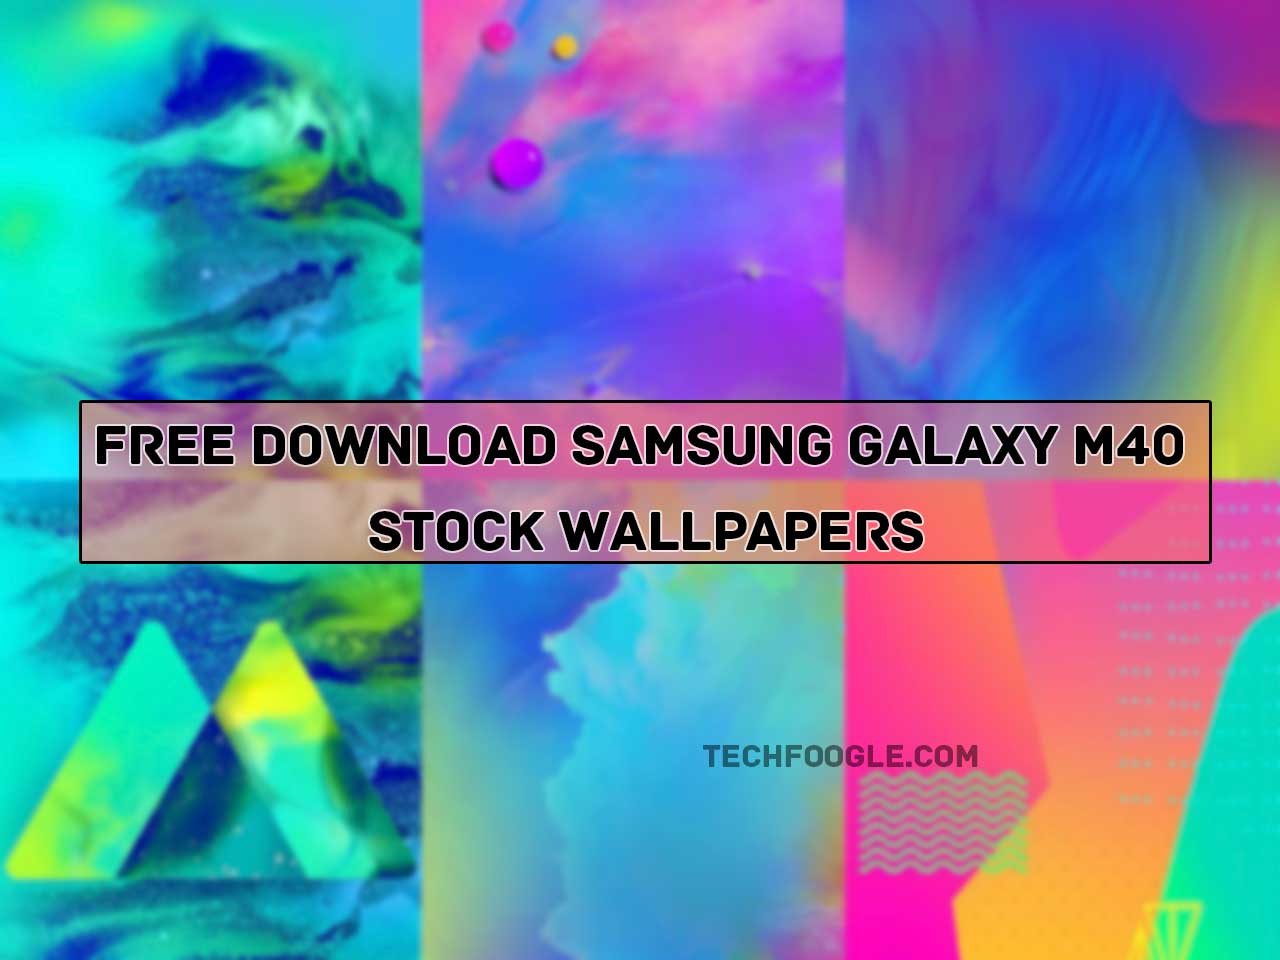 Free Download Samsung Galaxy M40 Stock Wallpapers [2019] - TechFoogle